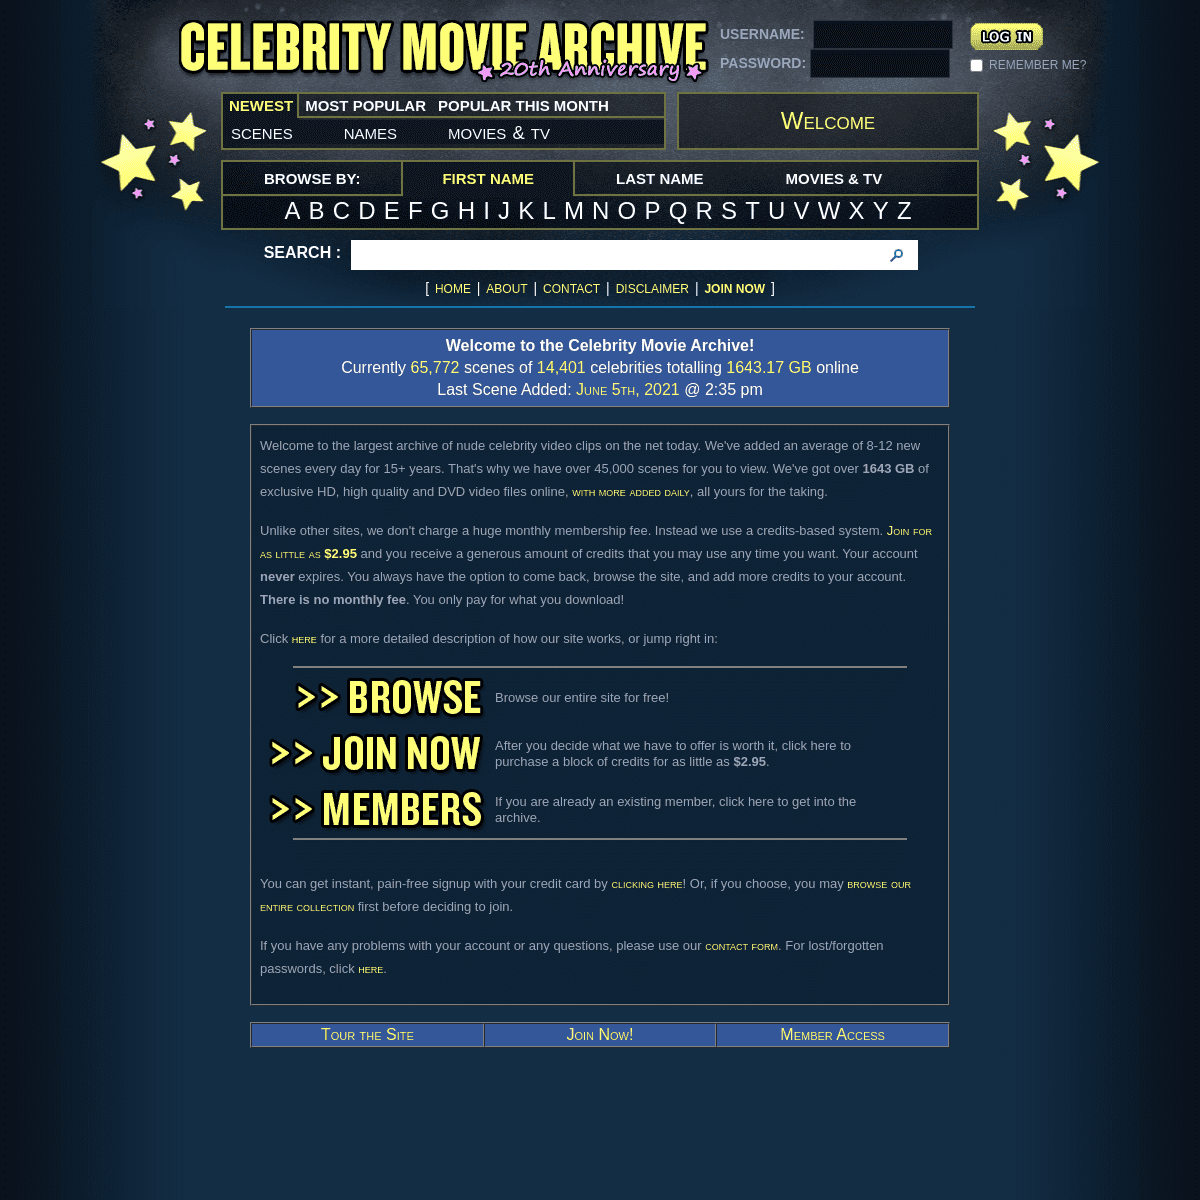 A complete backup of https://celebritymoviearchive.com